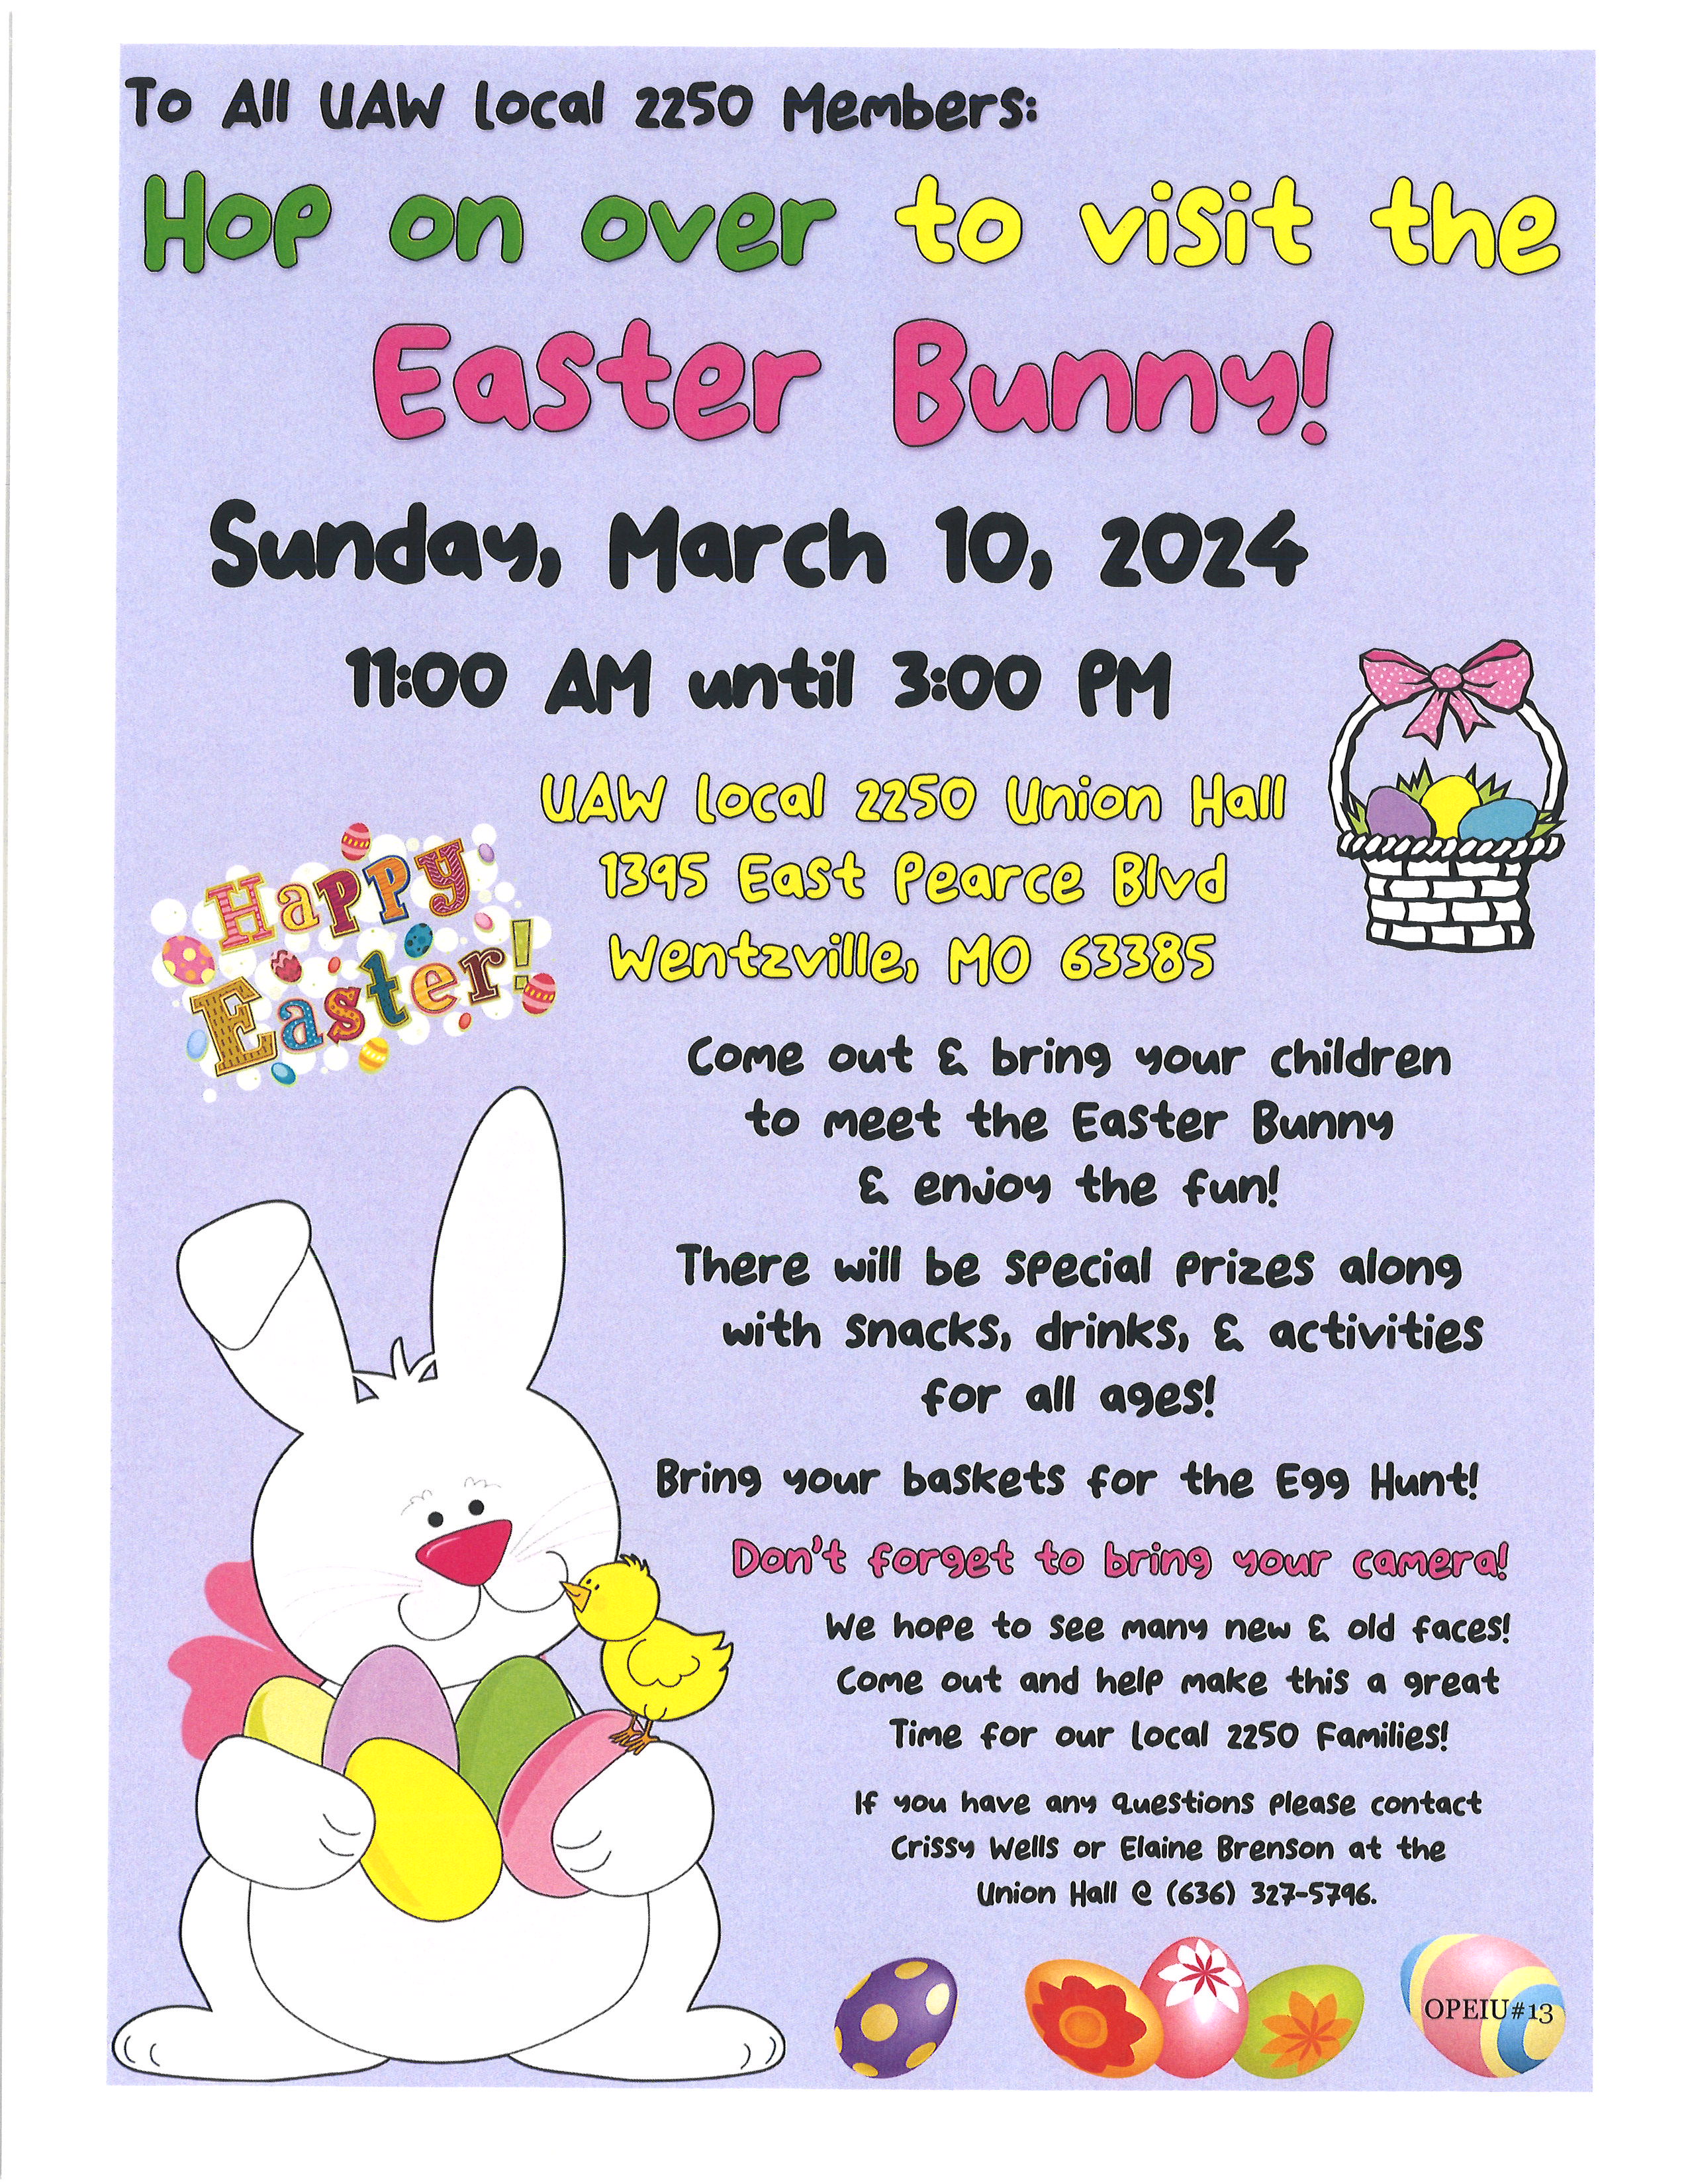 Revised: Easter Bunny News!